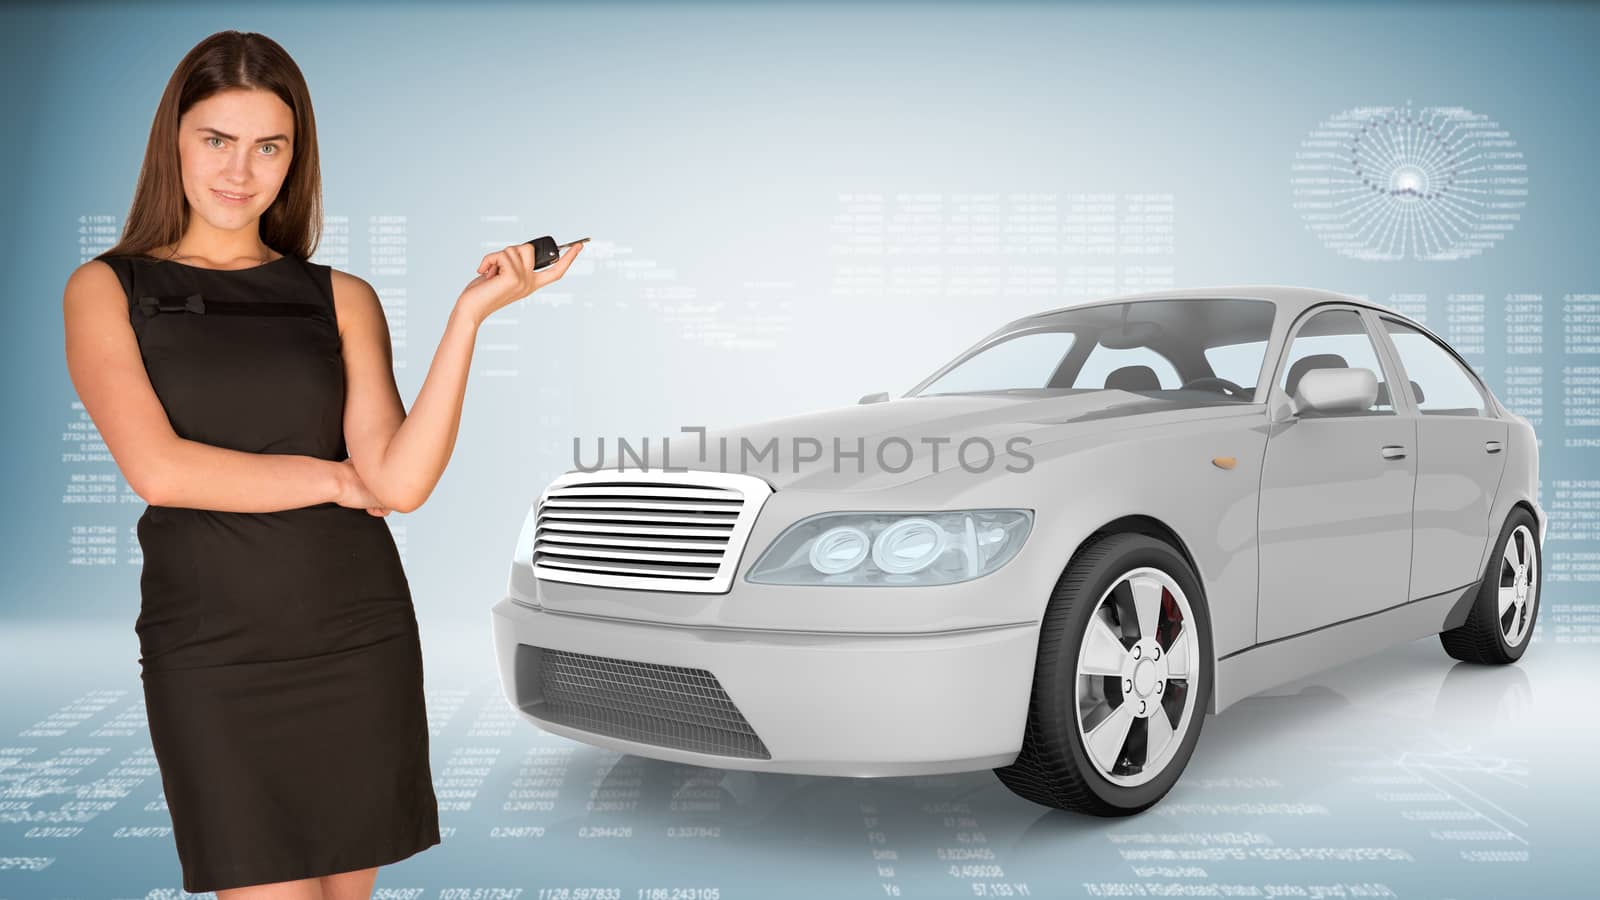 Businesslady holding car key looking at camera on abstract blue background